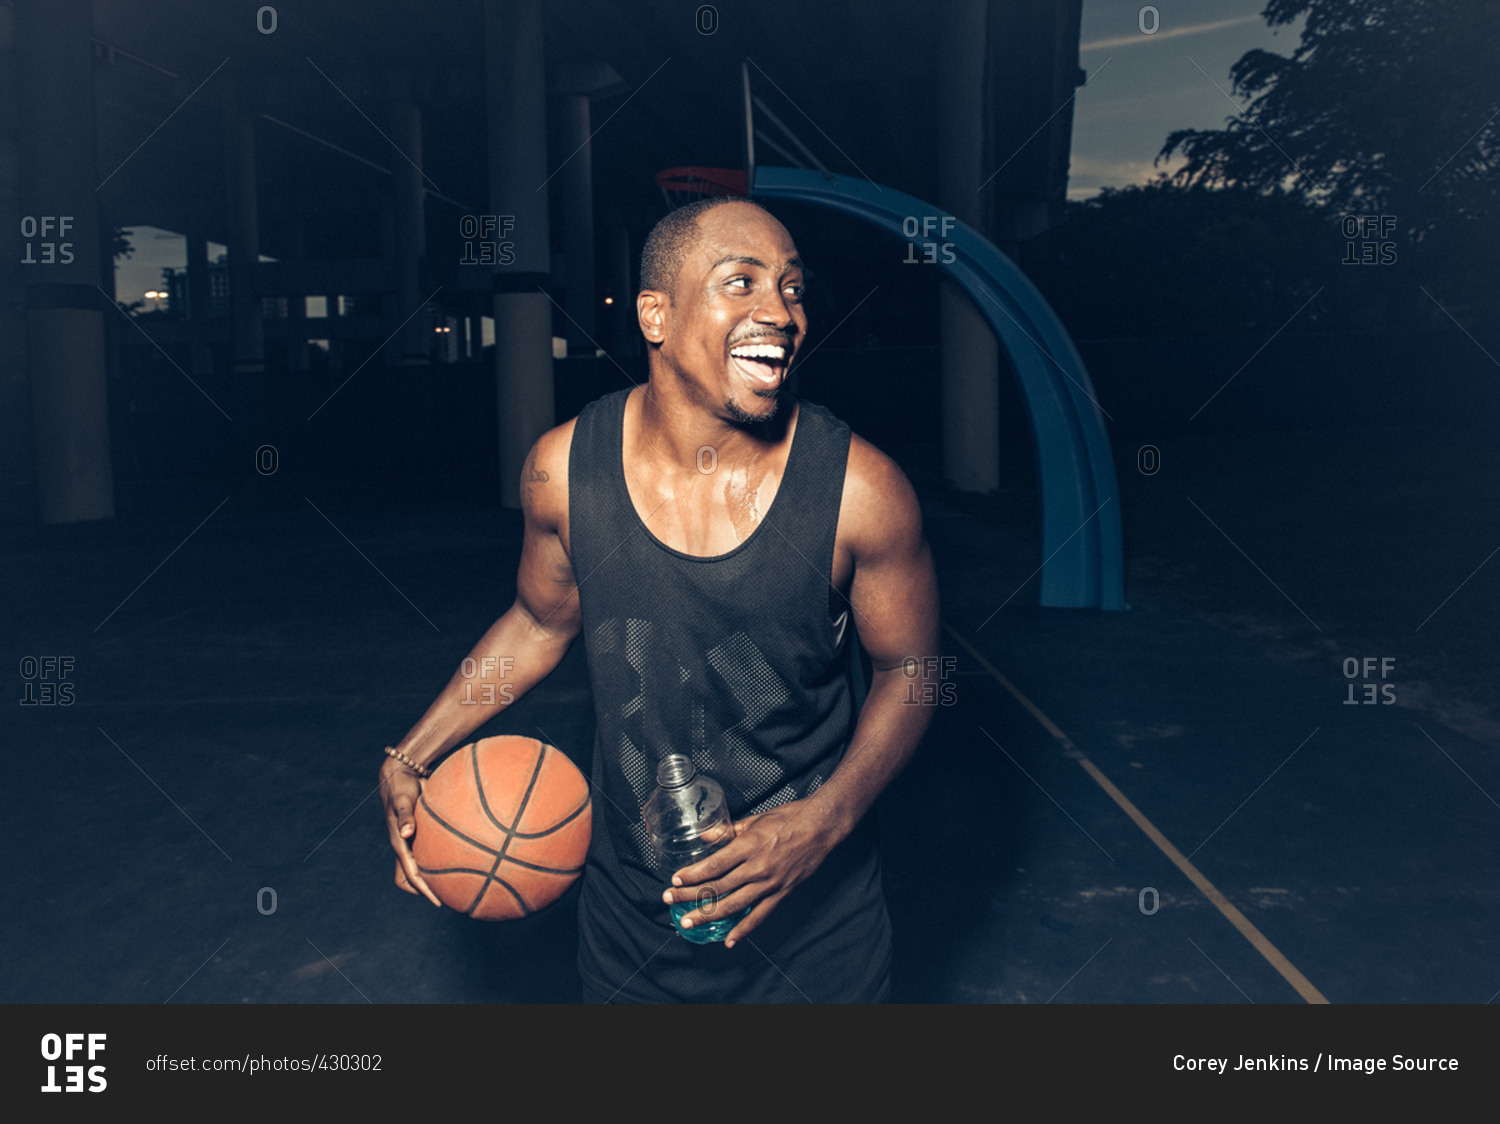 Man on basketball court holding basketball looking away smiling